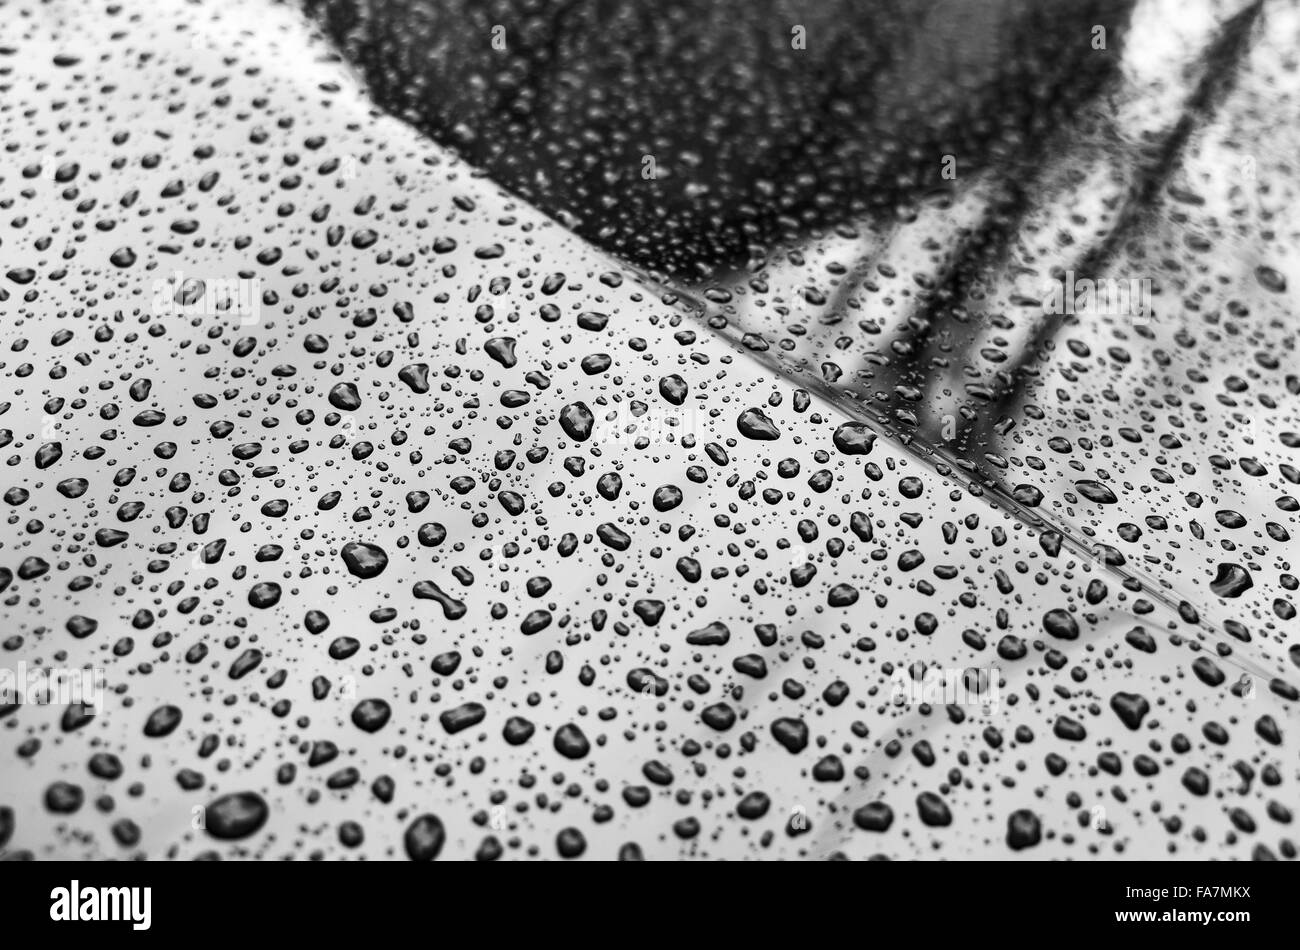 Black shining metallic car hood with raindrops, close-up photo with selective focus and shallow DOF Stock Photo